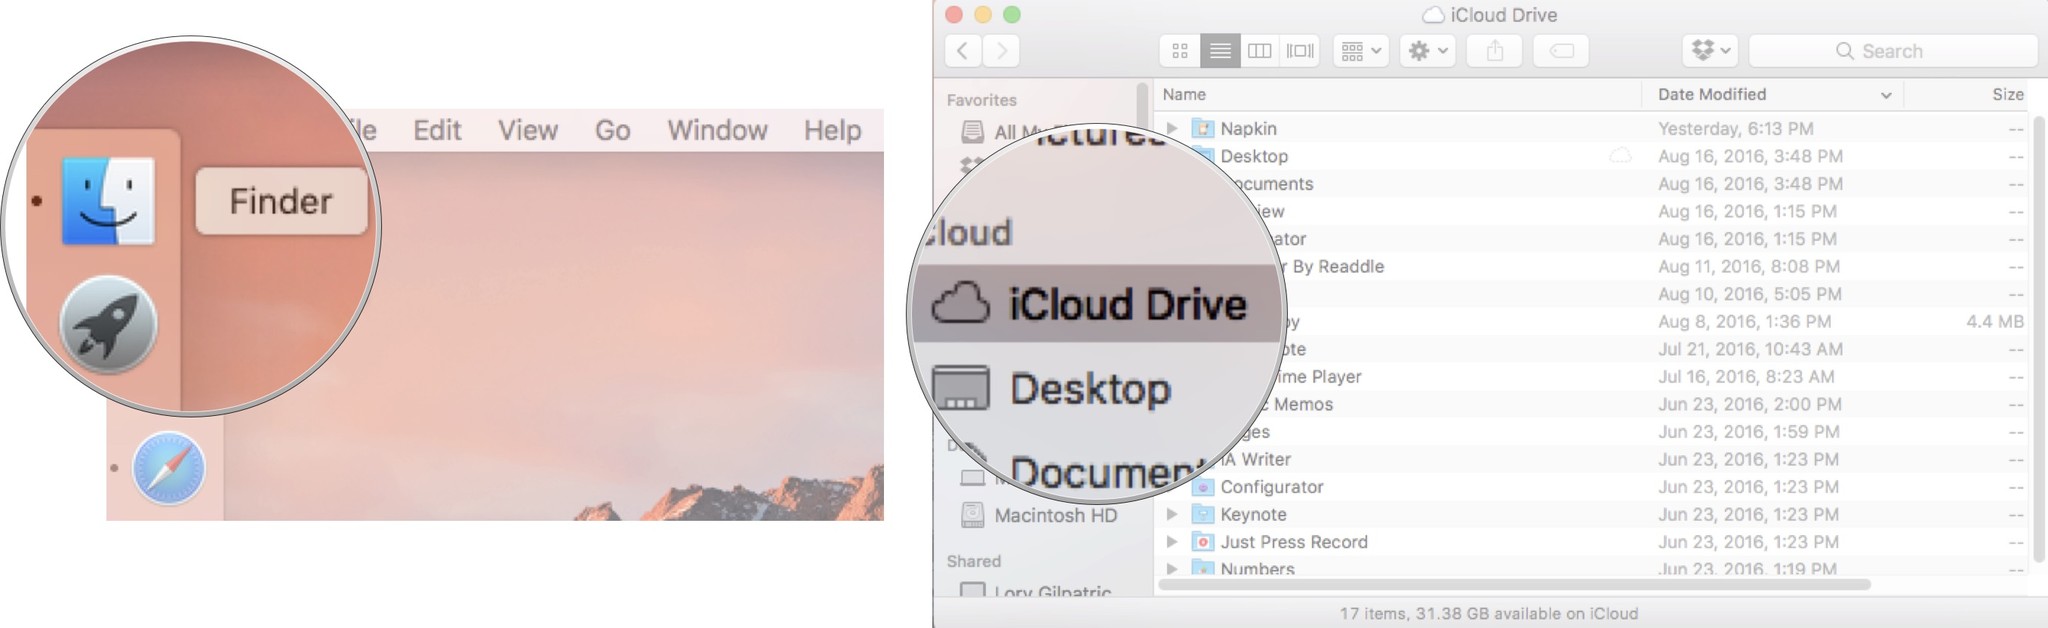 How to manually create a folder on Mac: Click Finder icon, Click iCloud Drive.